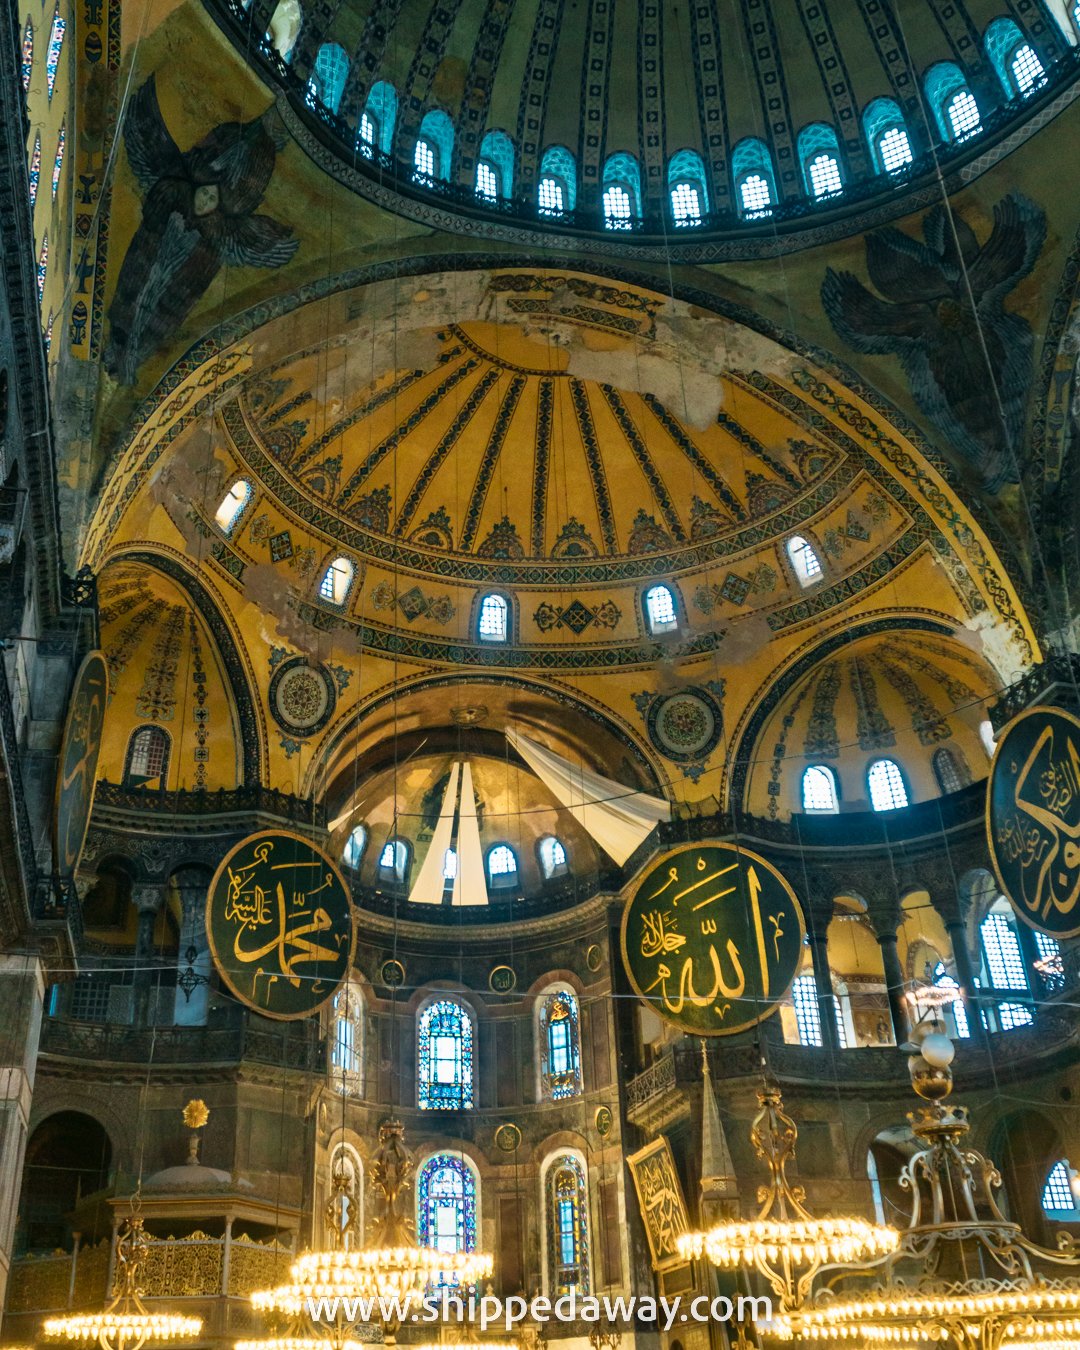 Hagia Sophia as a mosque with arabic inscriptions and some Christian icons seen, Istanbul